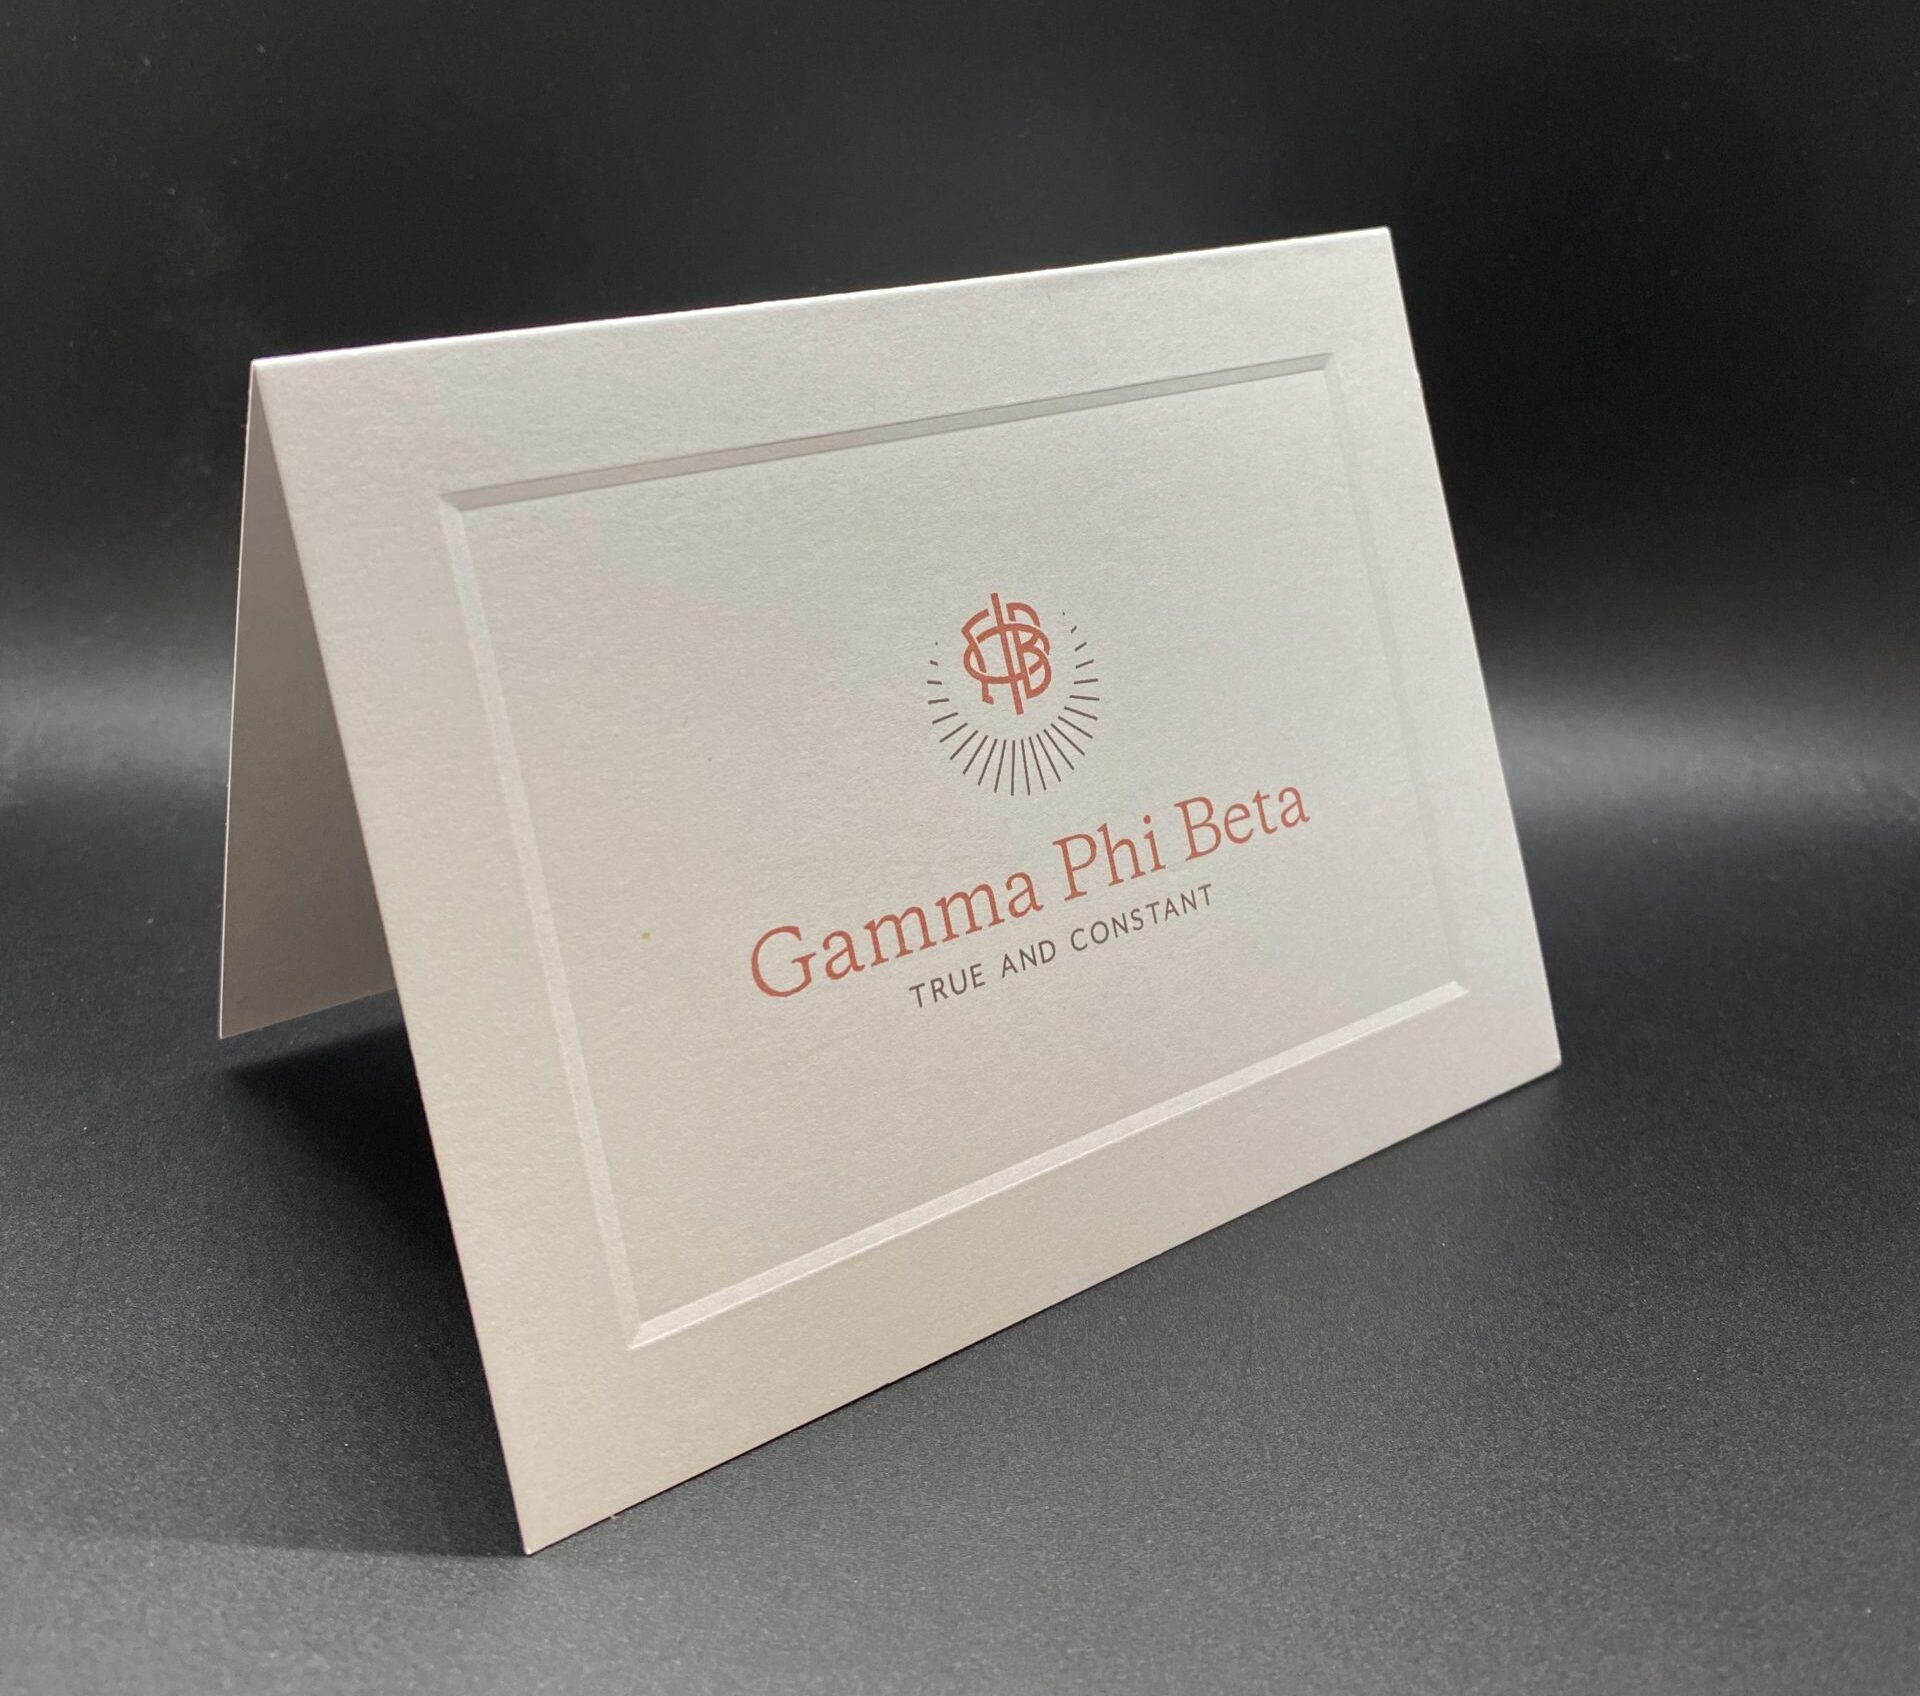 Official Notecards With New Graphic Standard Gamma Phi Beta